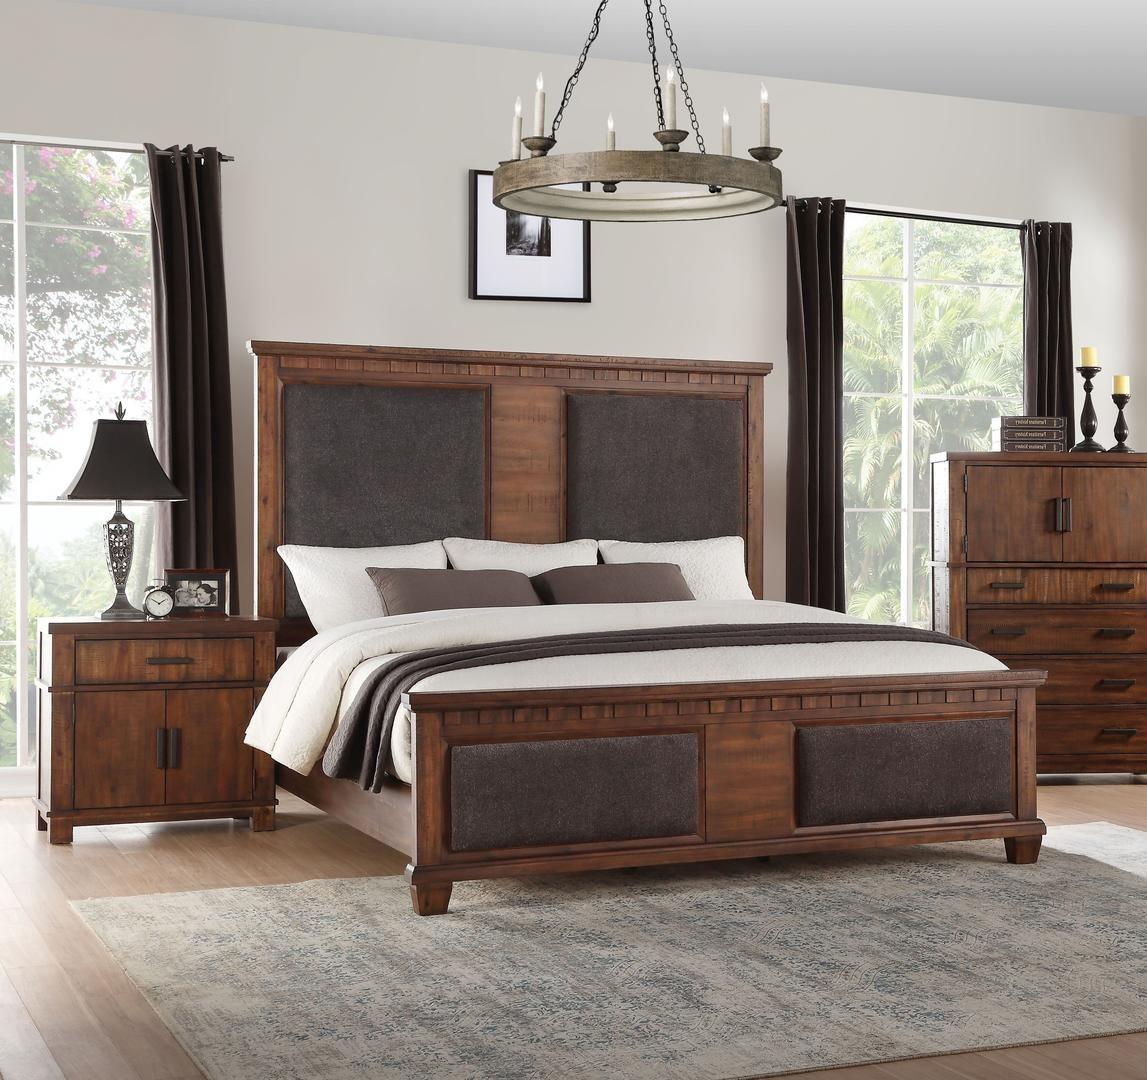 Classic, Traditional Panel Bedroom Set Vibia Vibia-27157EK-Set-3 in Cherry Finish, Brown Fabric